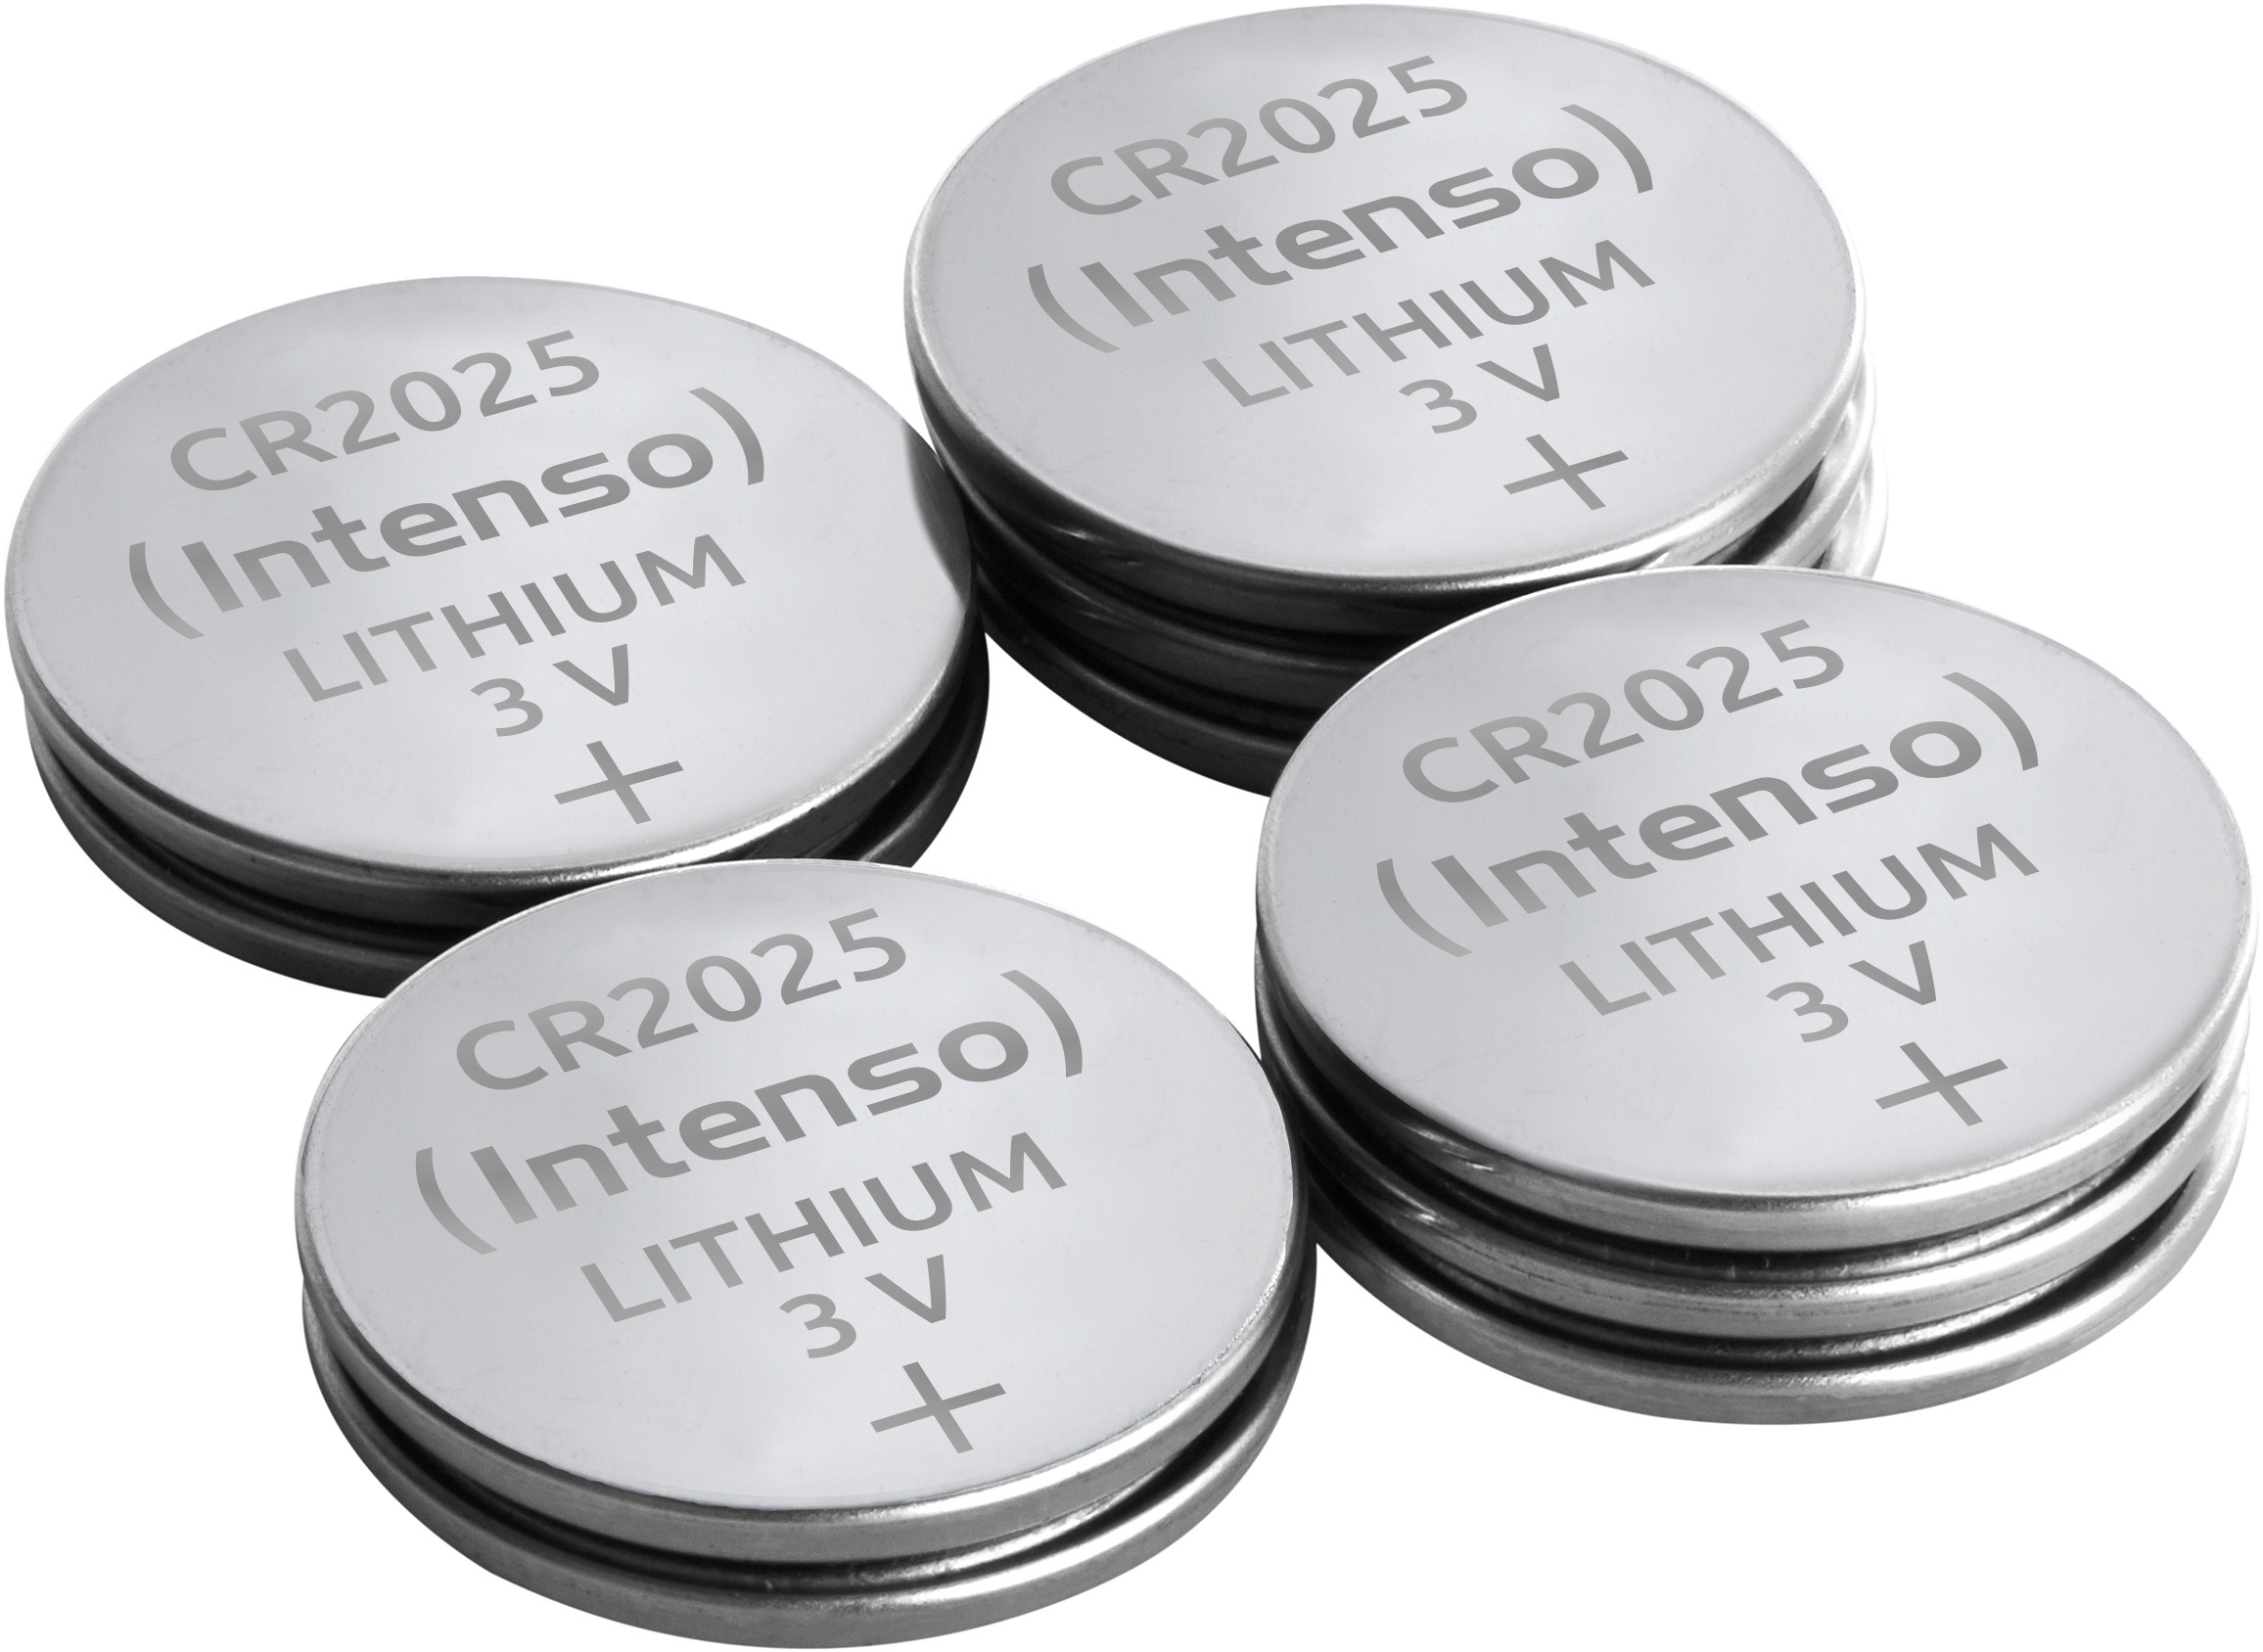 INTENSO Energy Ultra CR 2025 7502420 lithium bc 10pcs blister